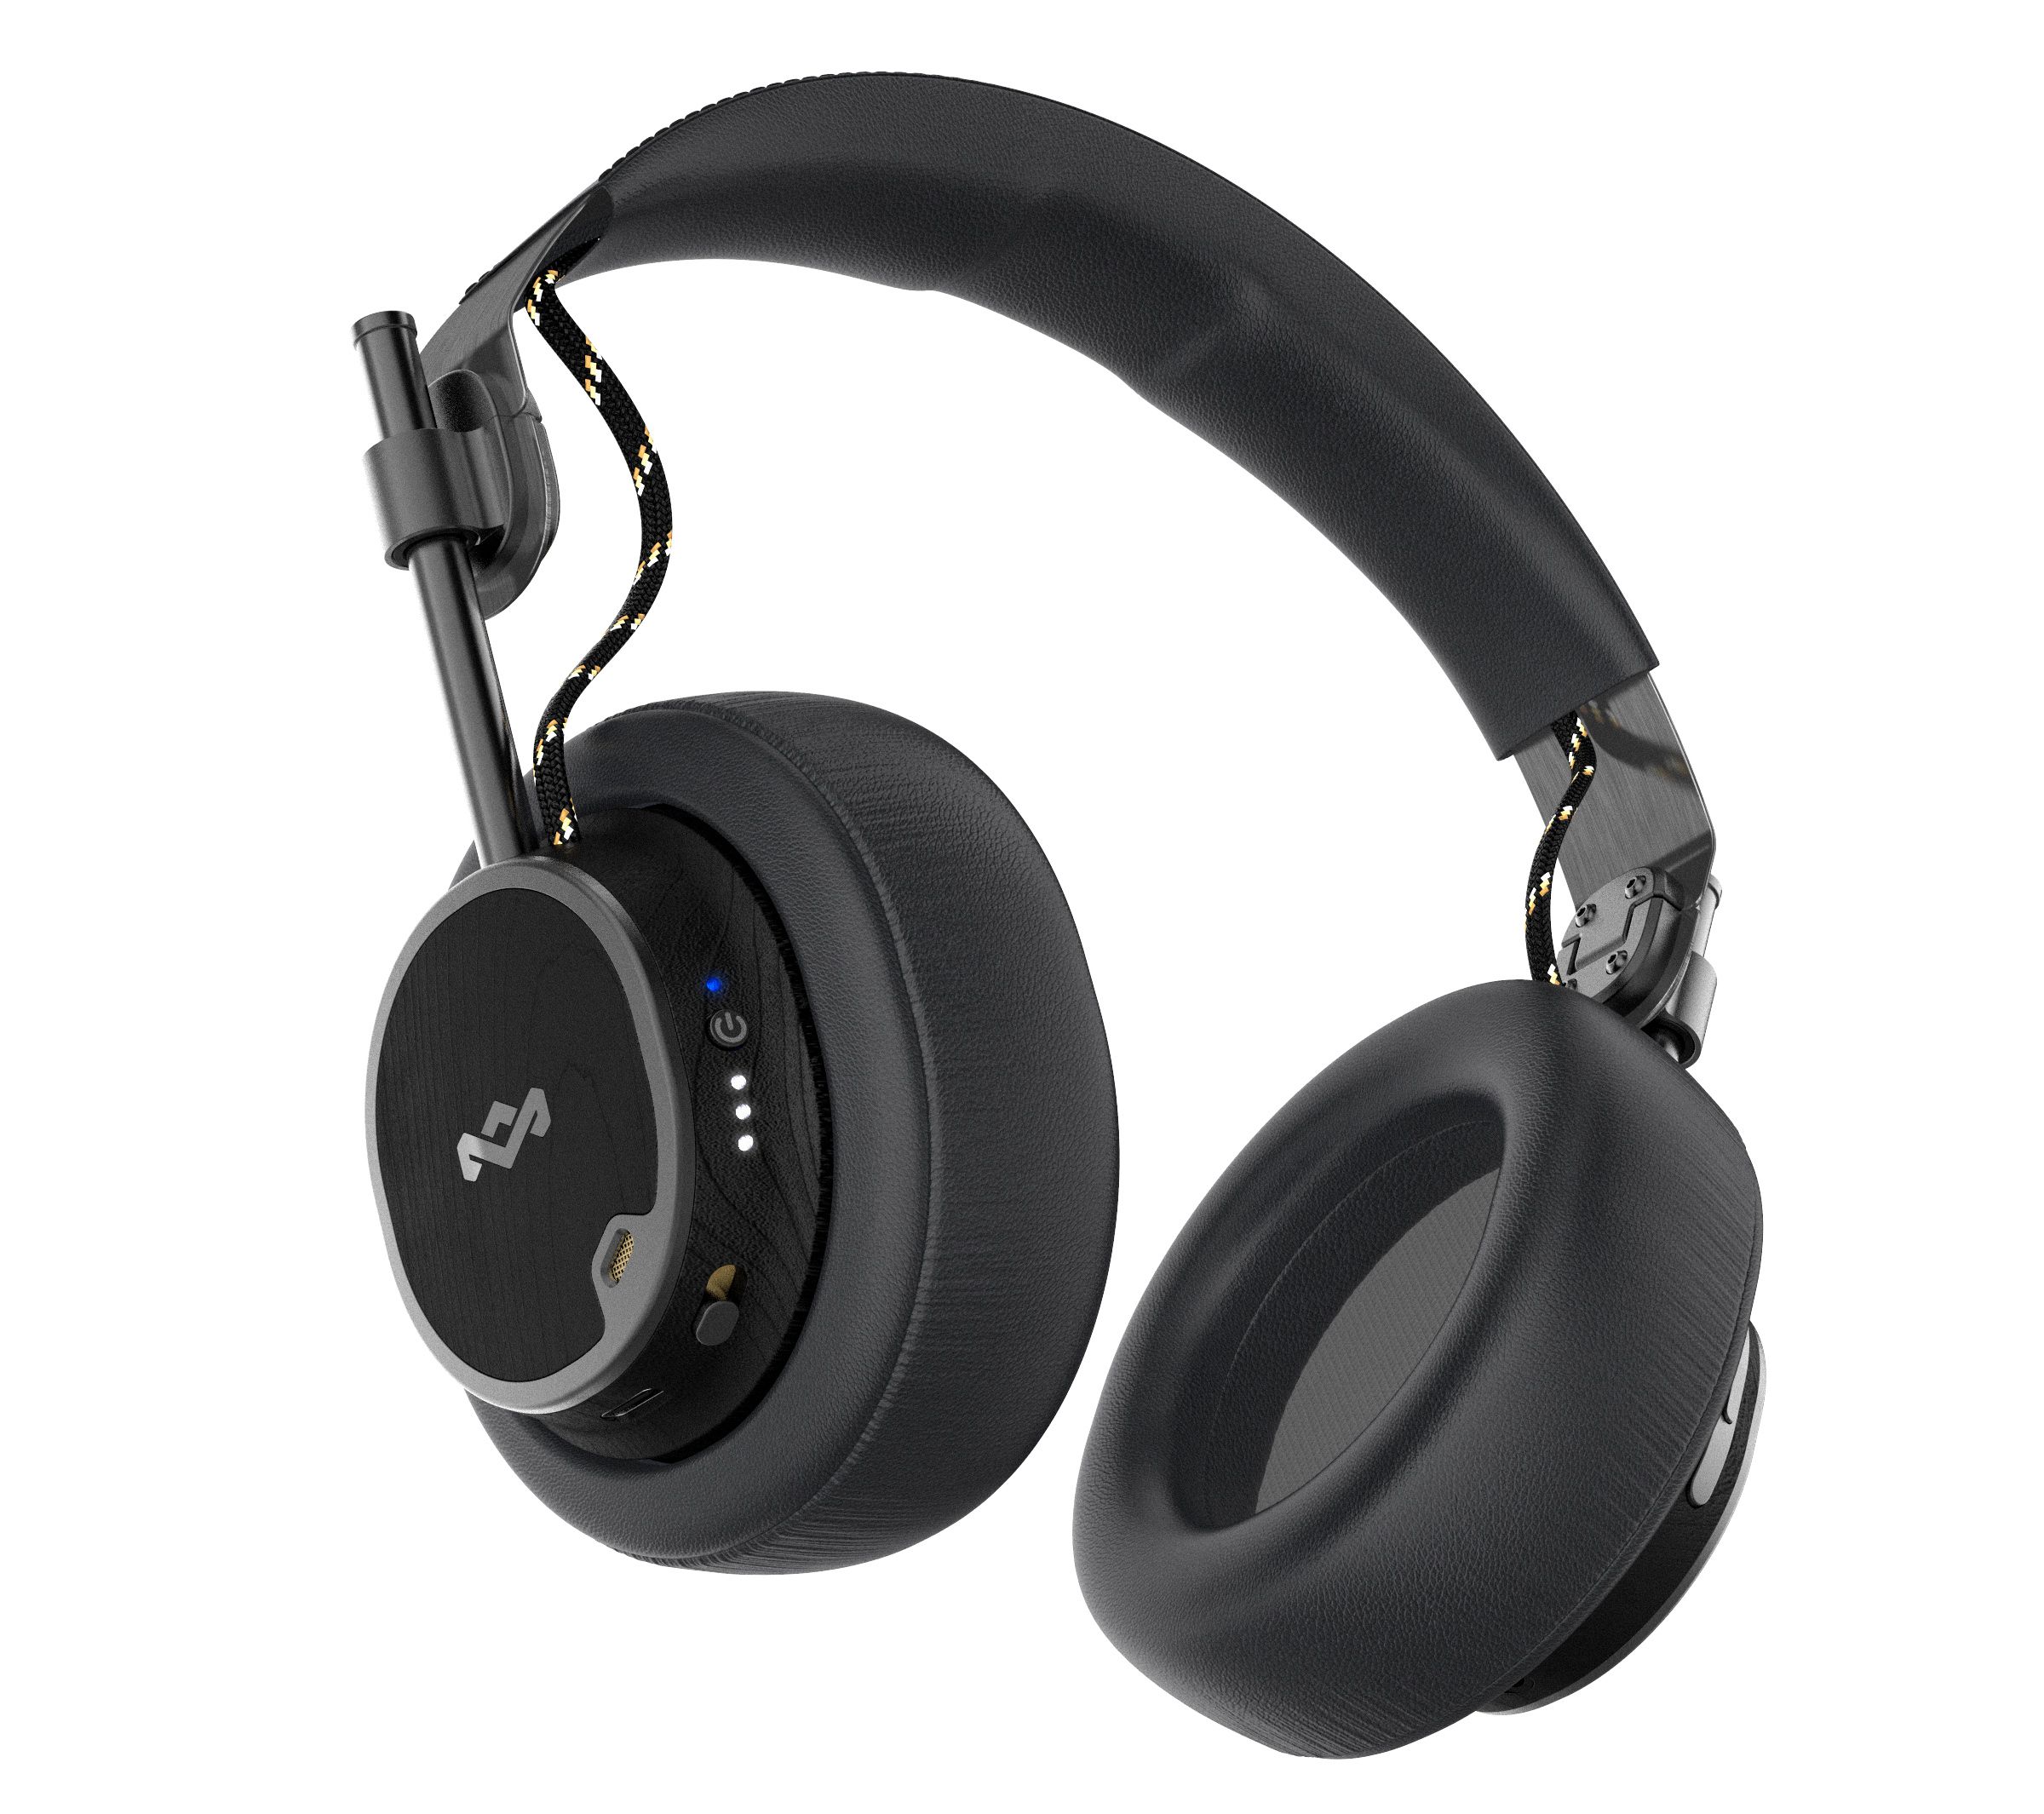 The Exodus over-ear headphones are available with and without noise cancellation. The former are pictured here. 